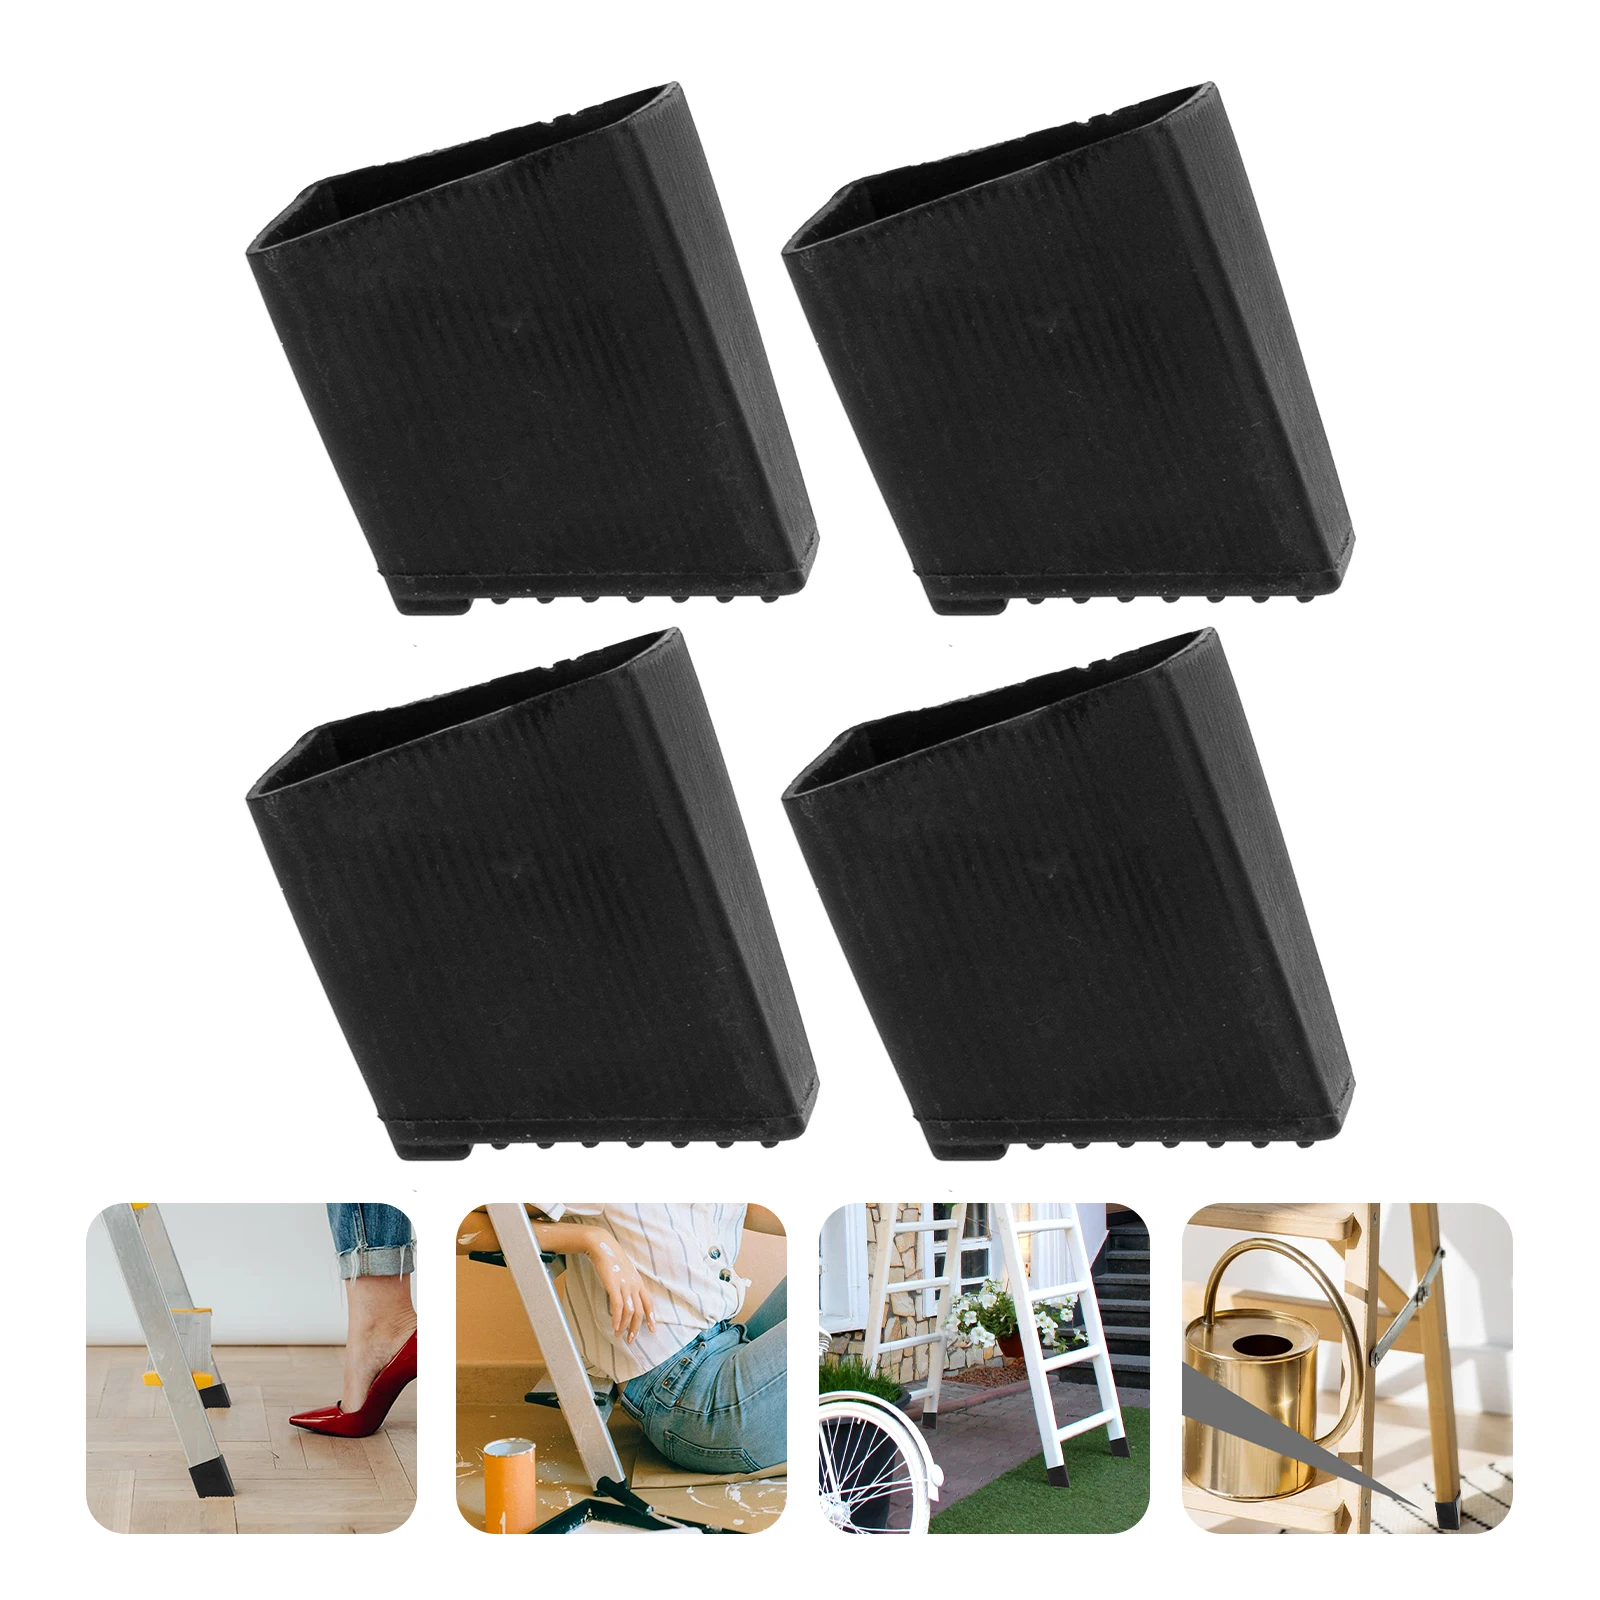 

Ladder Feet Pads Step Rubber Covers Cover Foot Leg Extension Matnonreplacements Caps Cushion Stool Mats Furniture Feet Cover